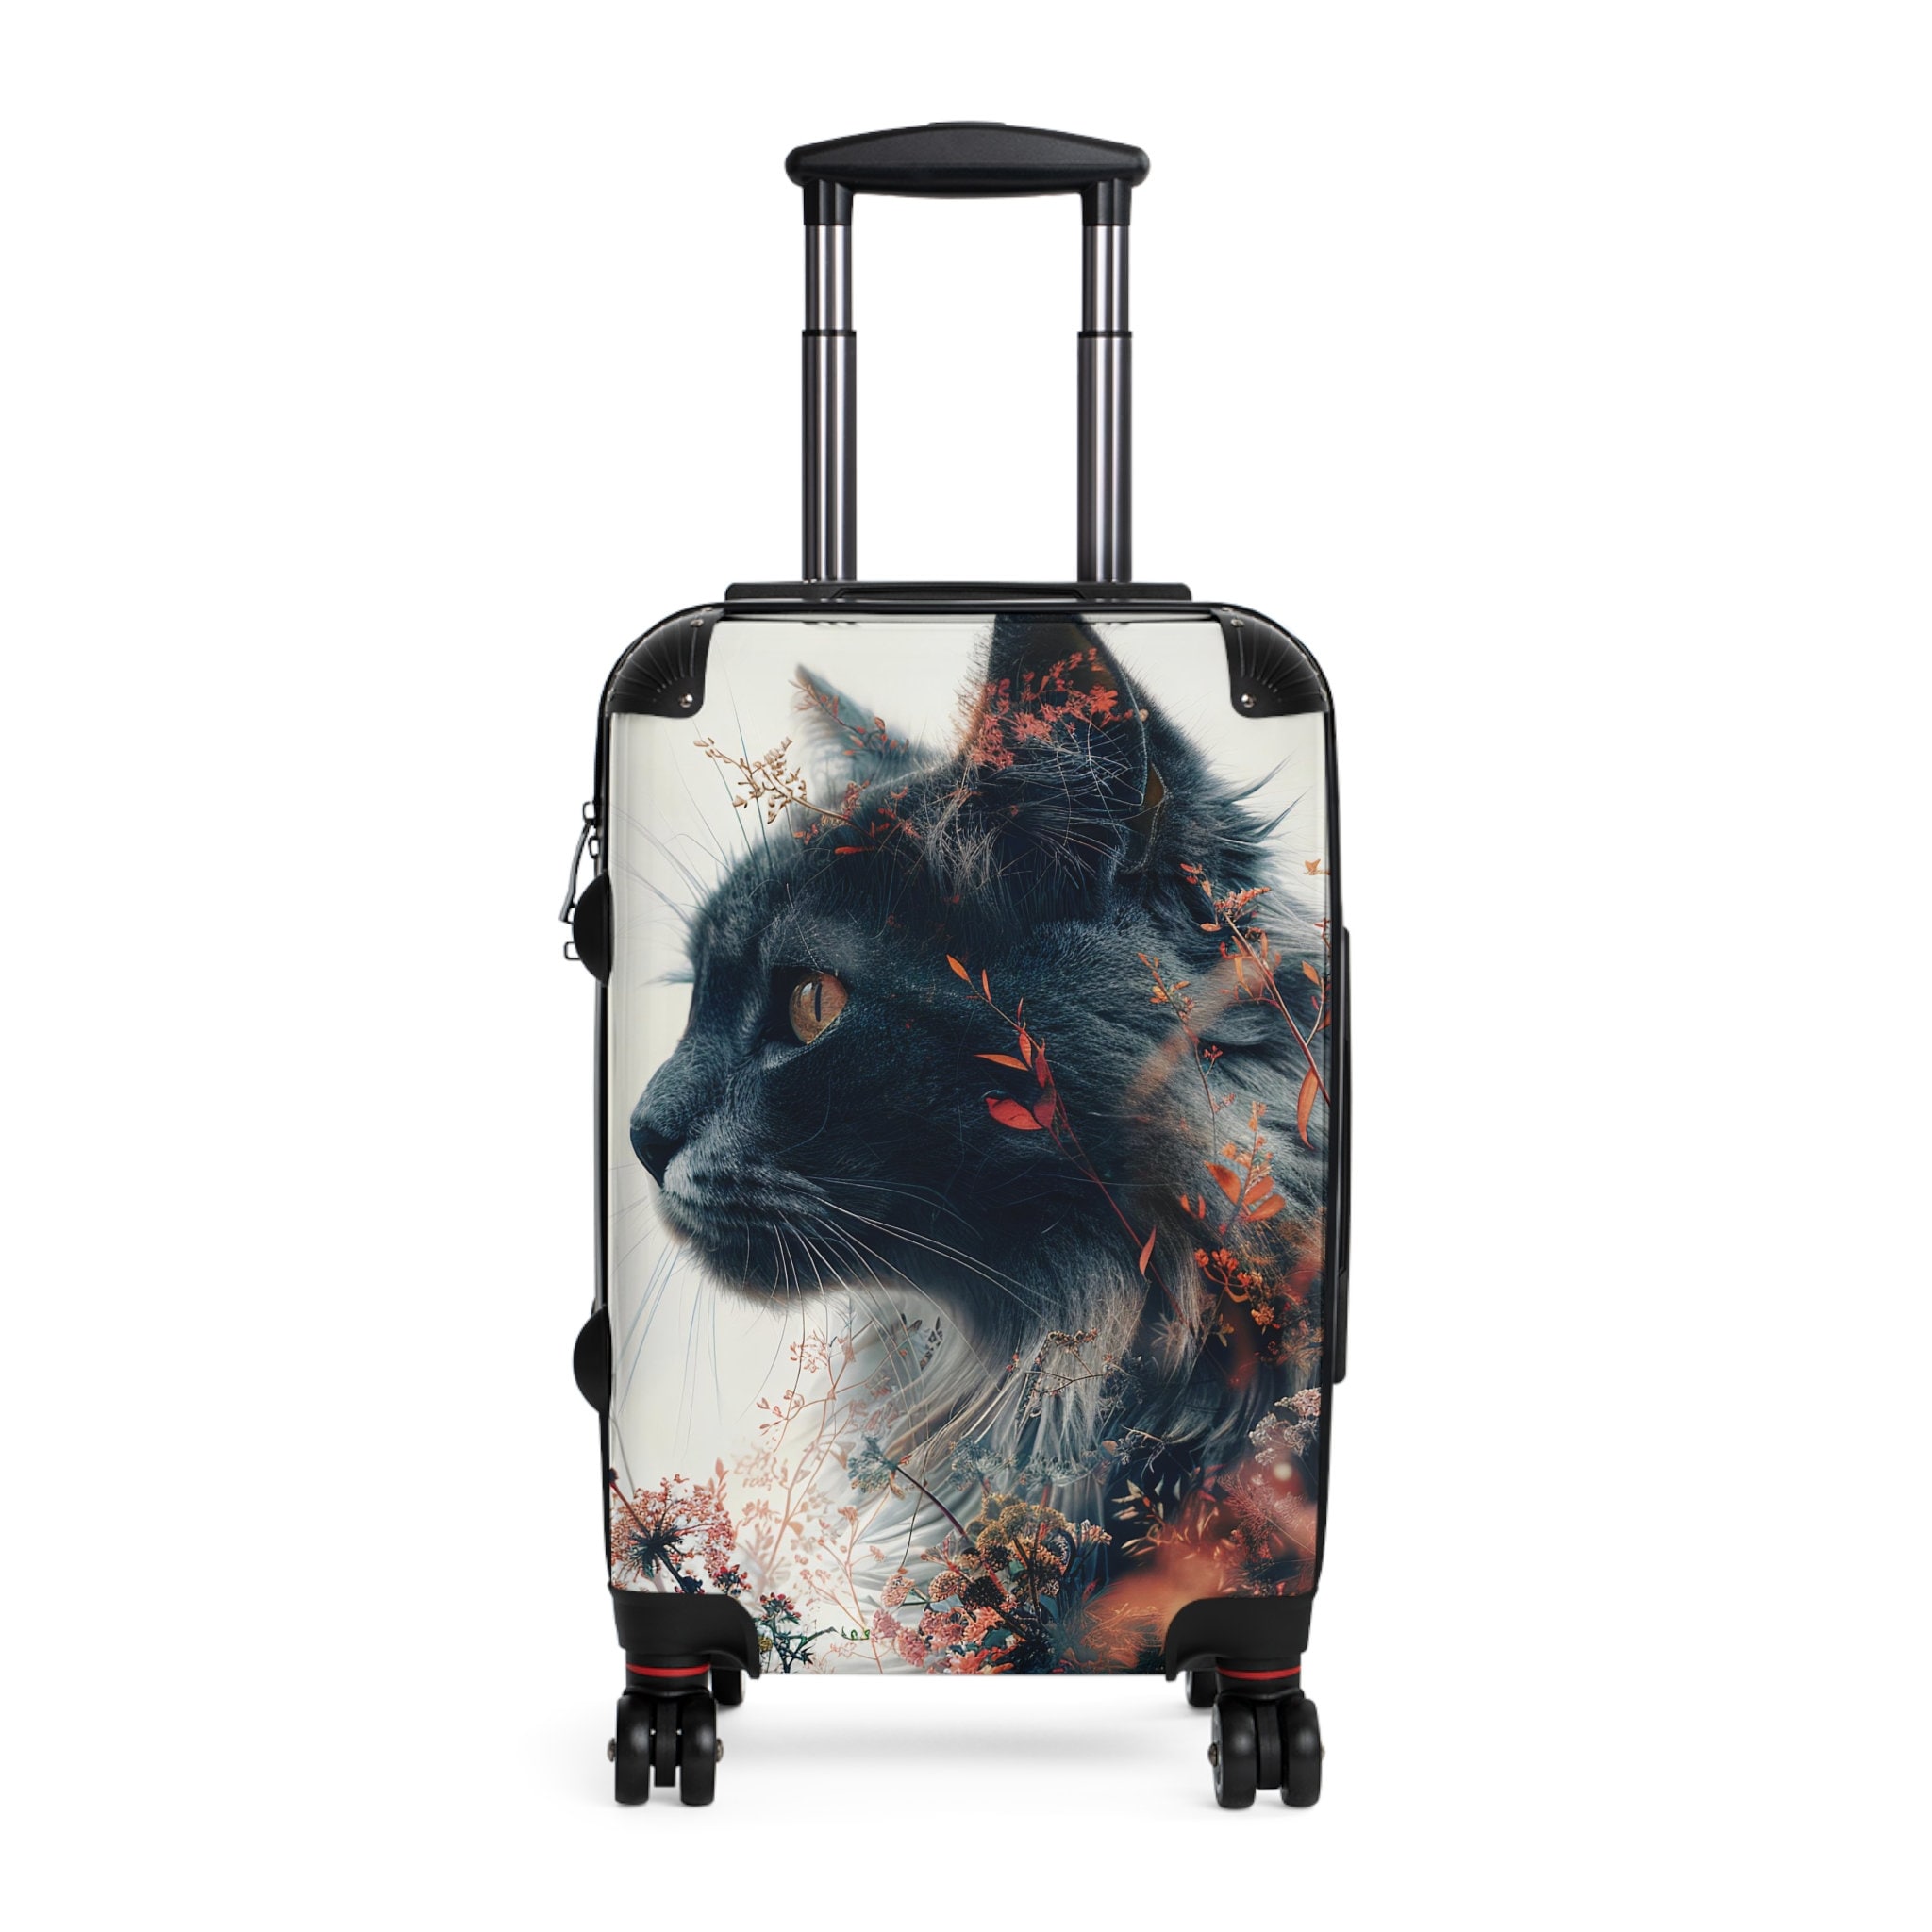 Floral Cat Face Suitcase - Distinct Whiskers Pattern, Hard-Shell Travel Luggage with 360 Swivel Wheels & Lock